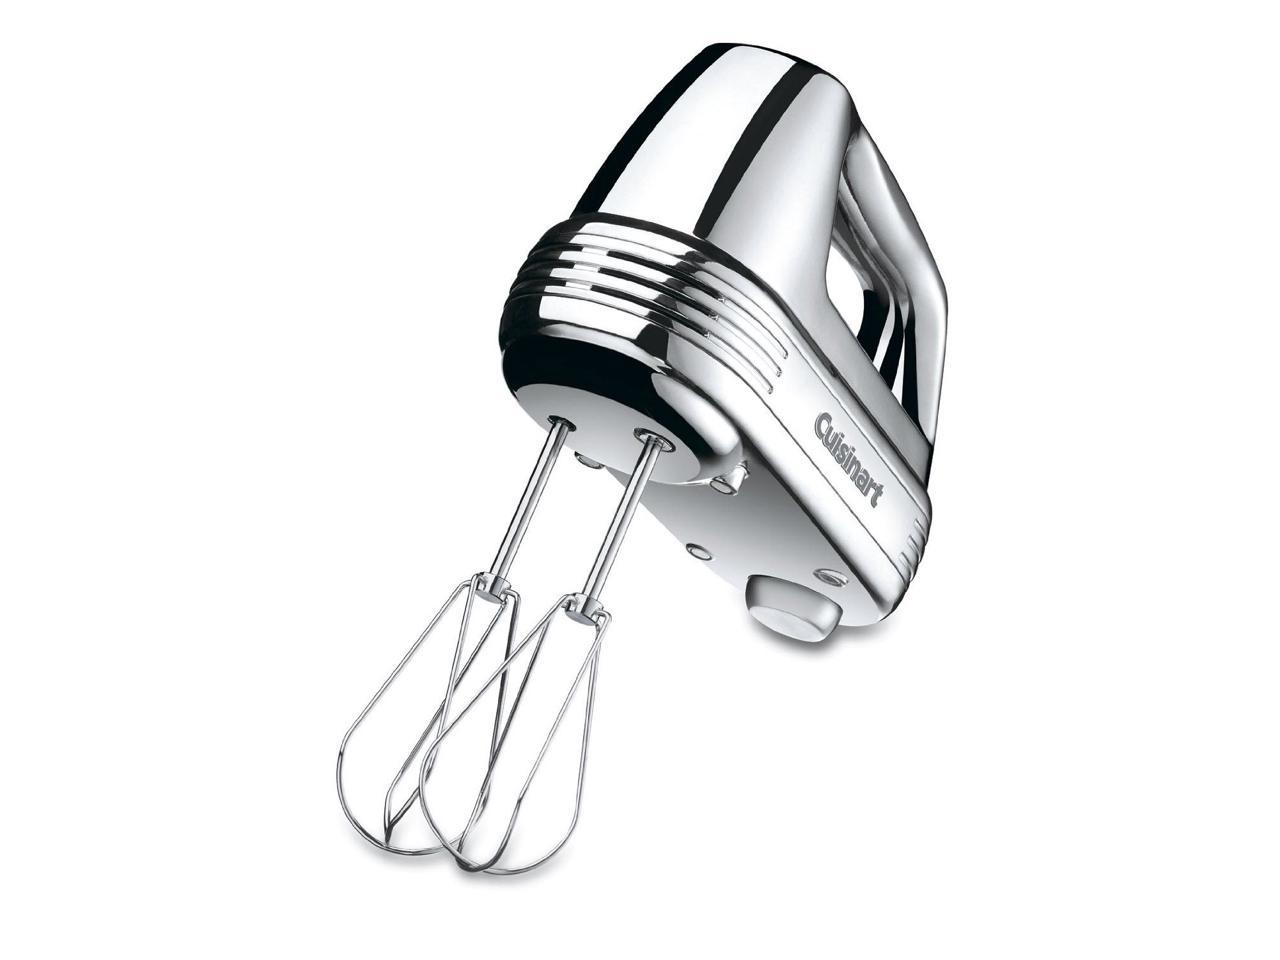 Cuisinart HM-70BCFR 7 Speed Hand Mixer, Brushed Chrome - Certified Refurbished